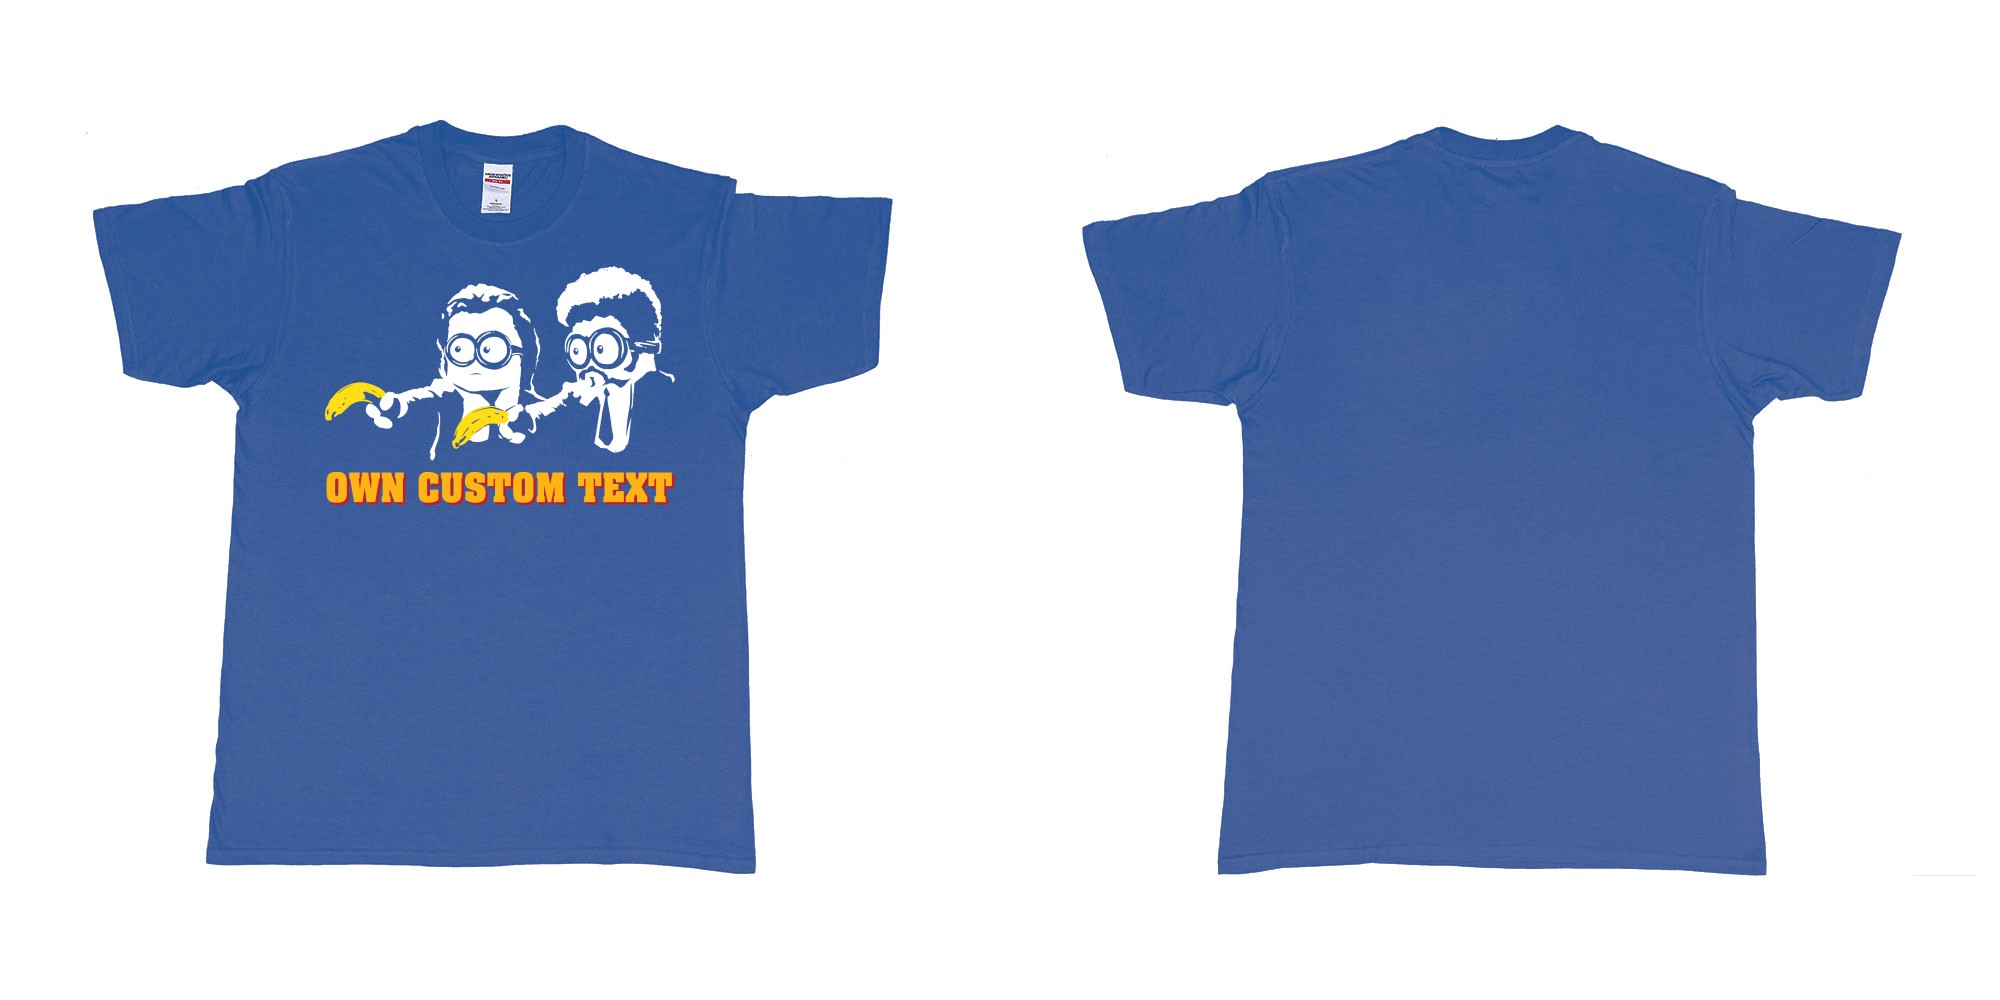 Custom tshirt design minions pulp fiction in fabric color royal-blue choice your own text made in Bali by The Pirate Way